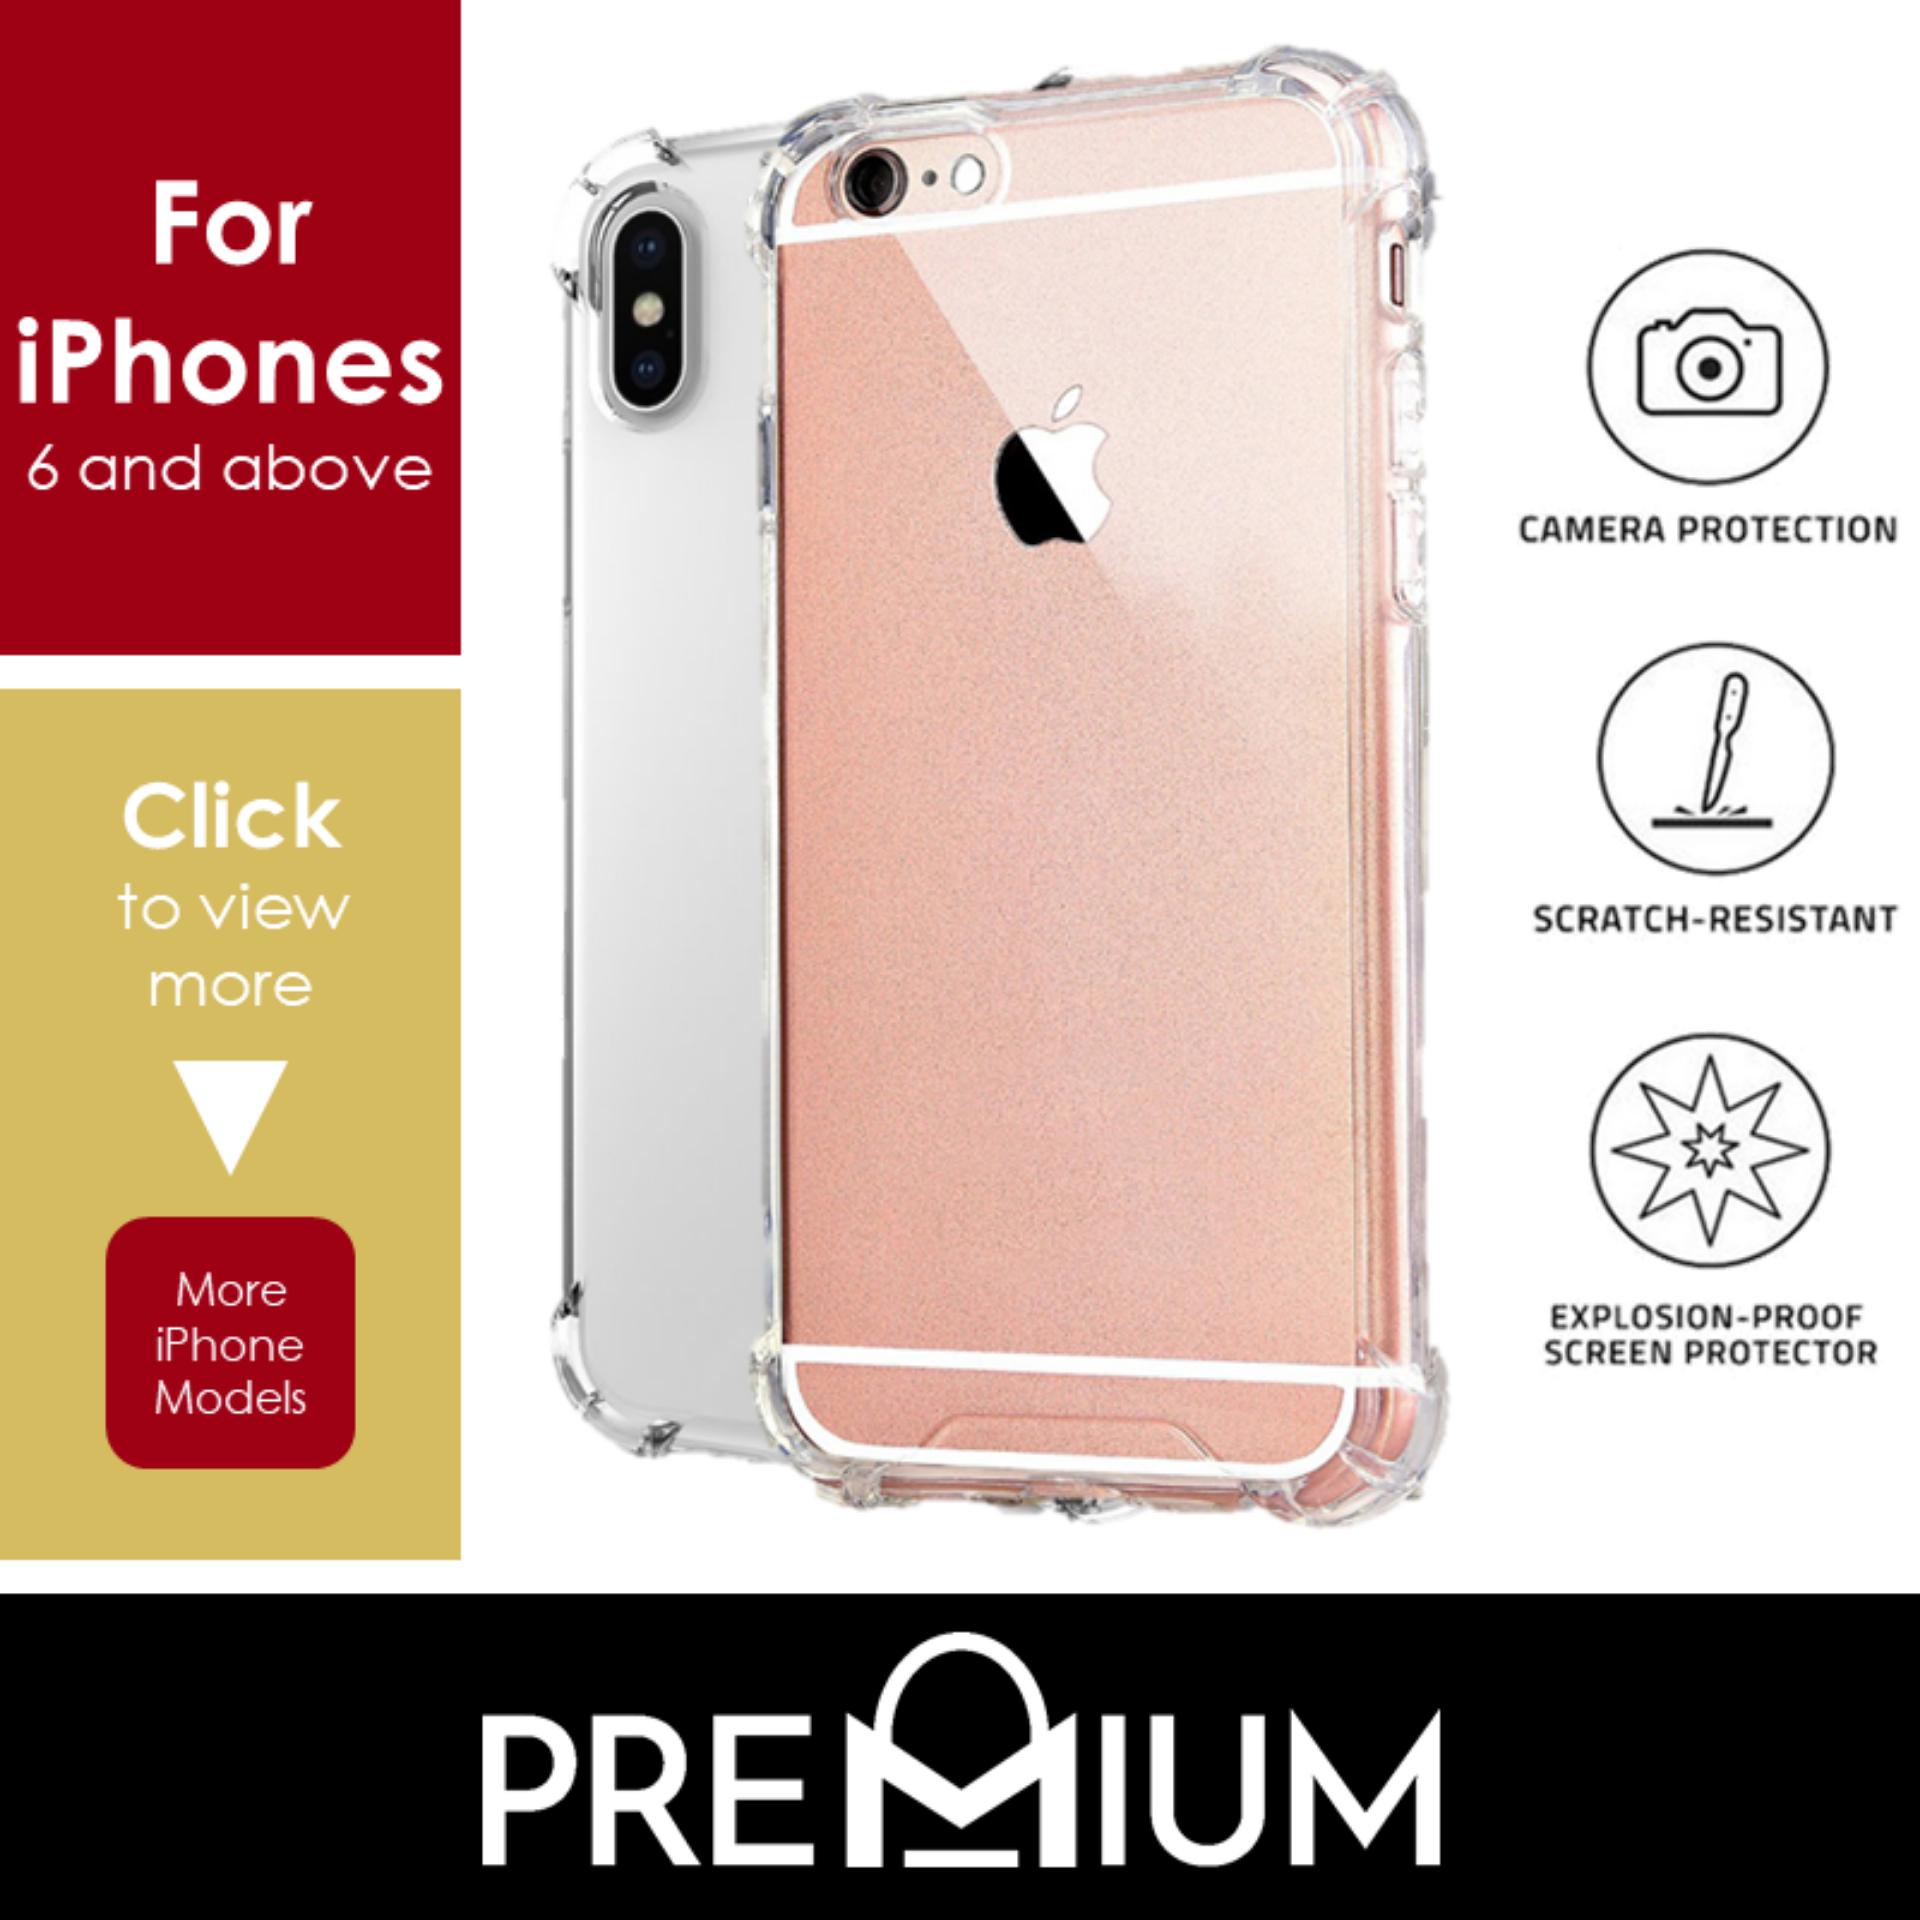 Anti Shock Tough Armor Slim Flexible Case Casing Cover Phone Cases For iPhone Xs Max XR X 7 8 6 6S 5 5S Plus – Clear